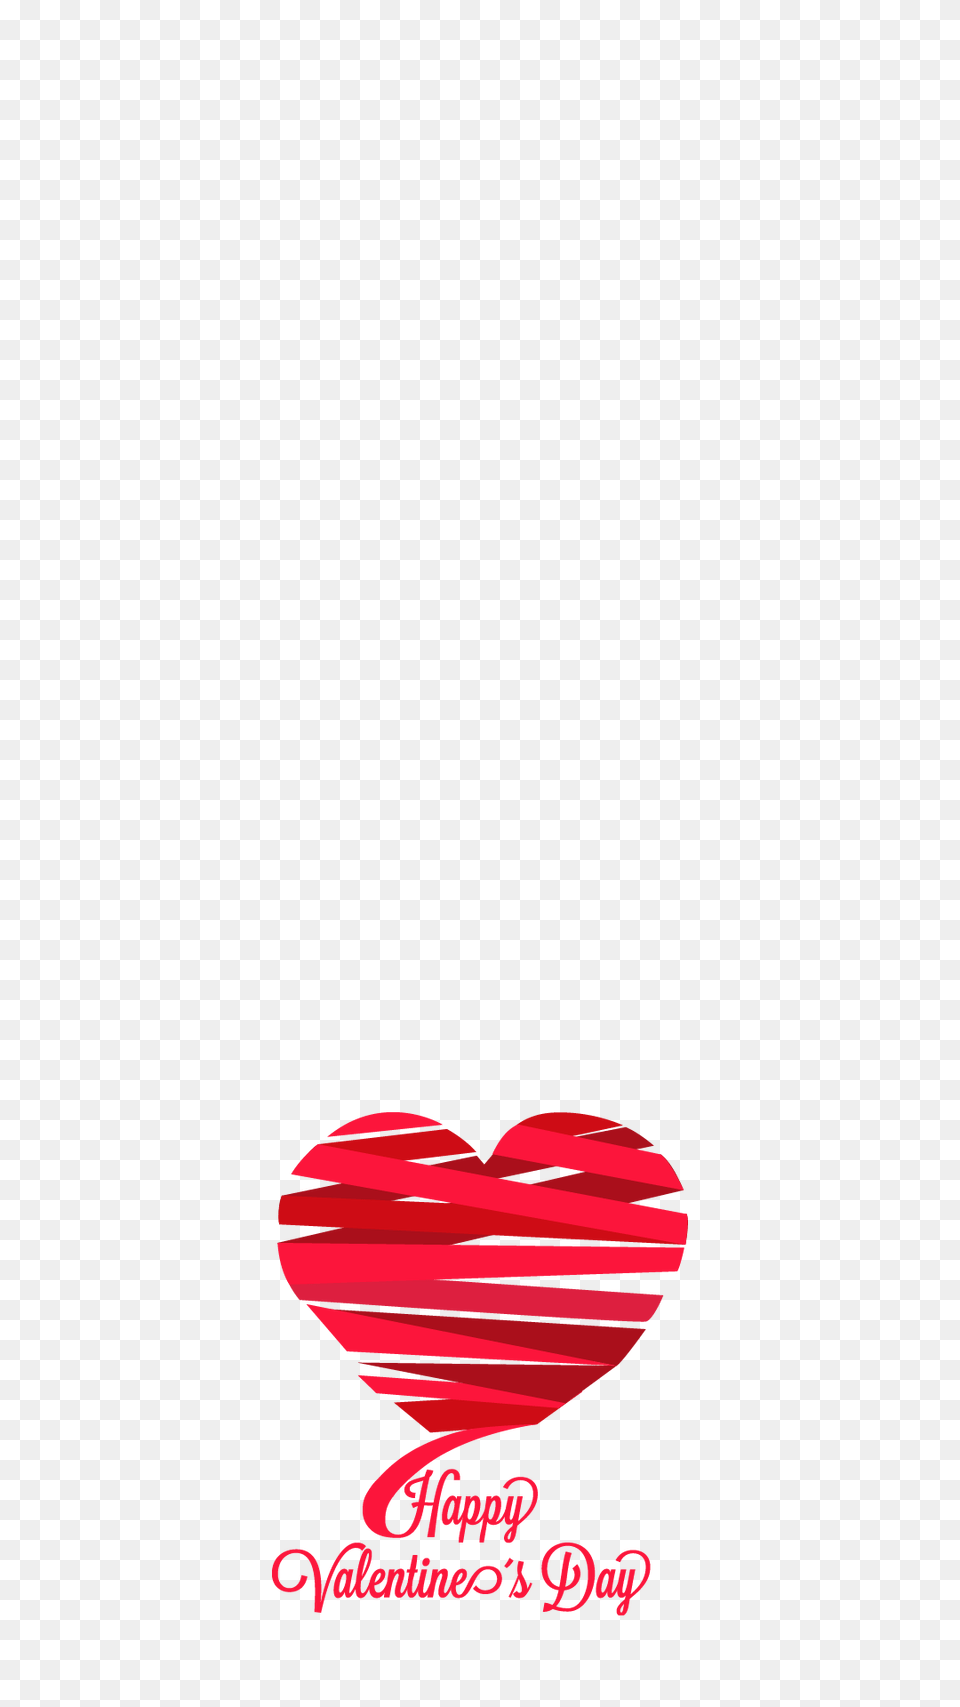 Happy Valentines Day Snapchat Filter Geofilter Maker On Filterpop, Logo, Heart Free Png